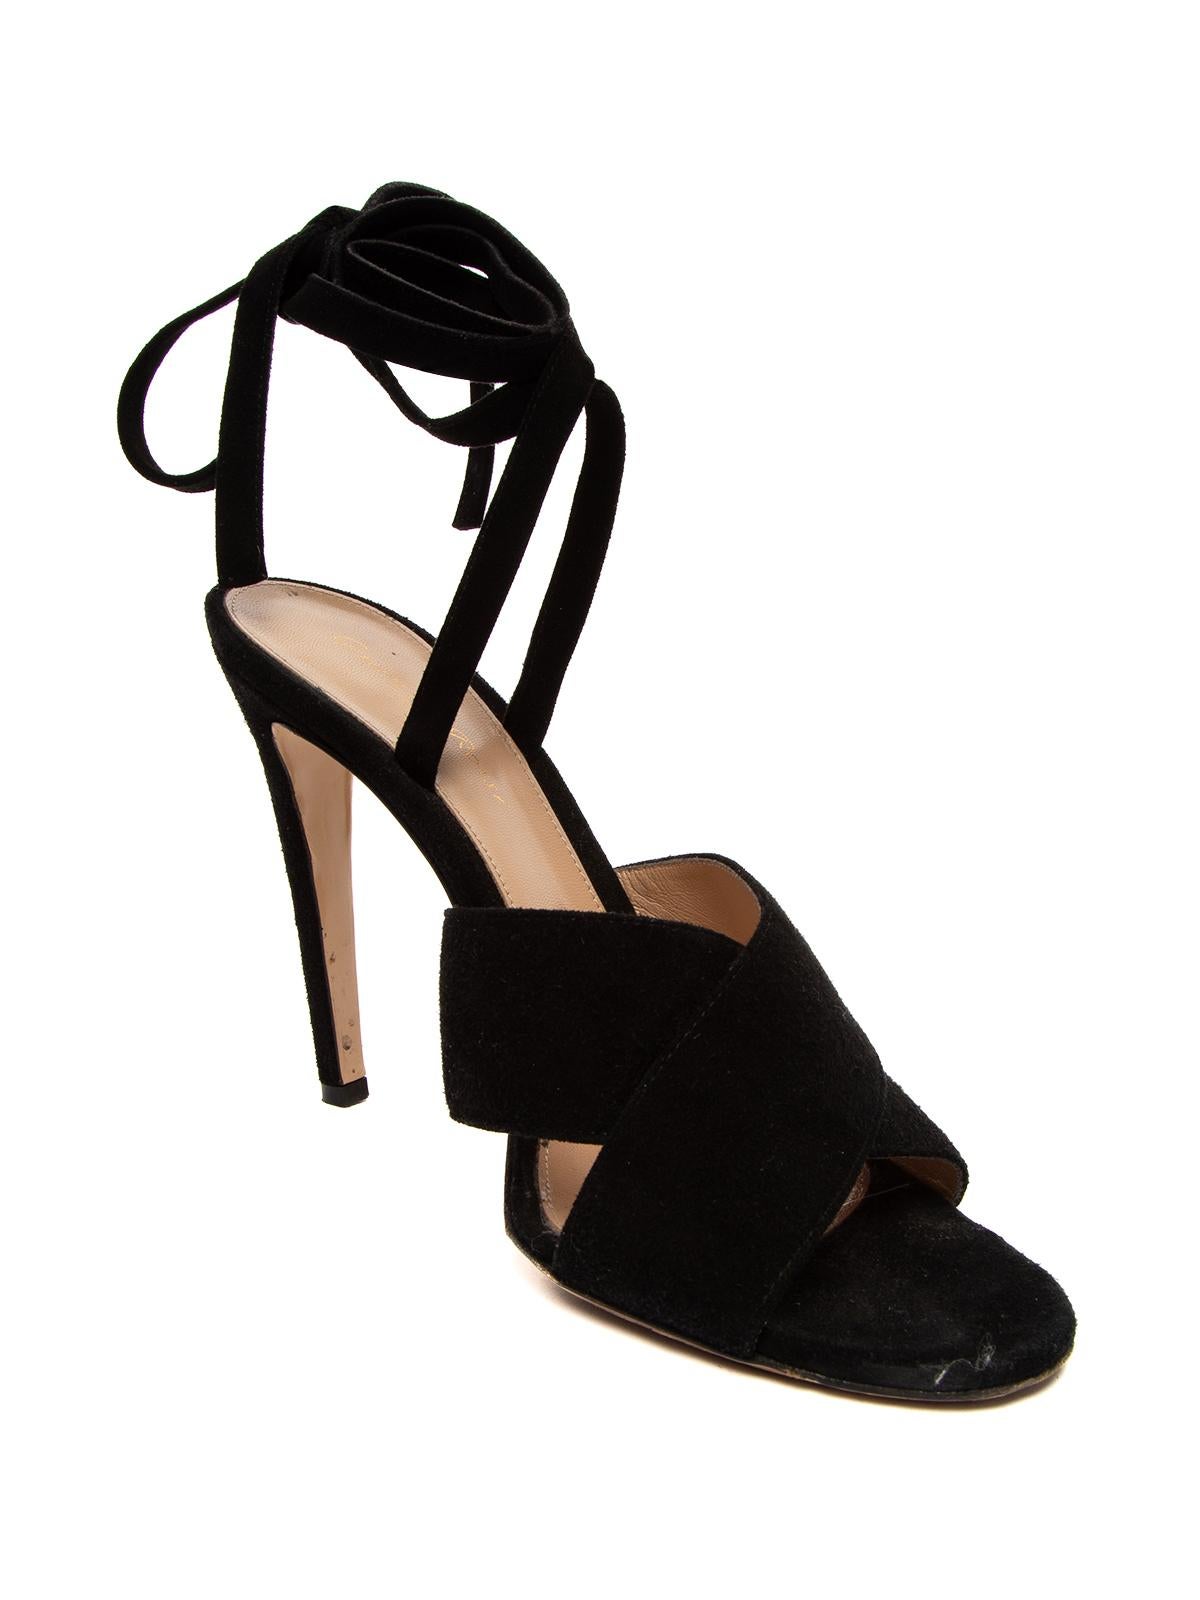 CONDITION is Good. General wear to heels is evident. Moderate signs of wear to outsole on this used Gianvito Rossi designer resale item. Details Colour - black Material - suede Style - strappy Toe style - peep-toe Ankle straps tie fastenings Heel